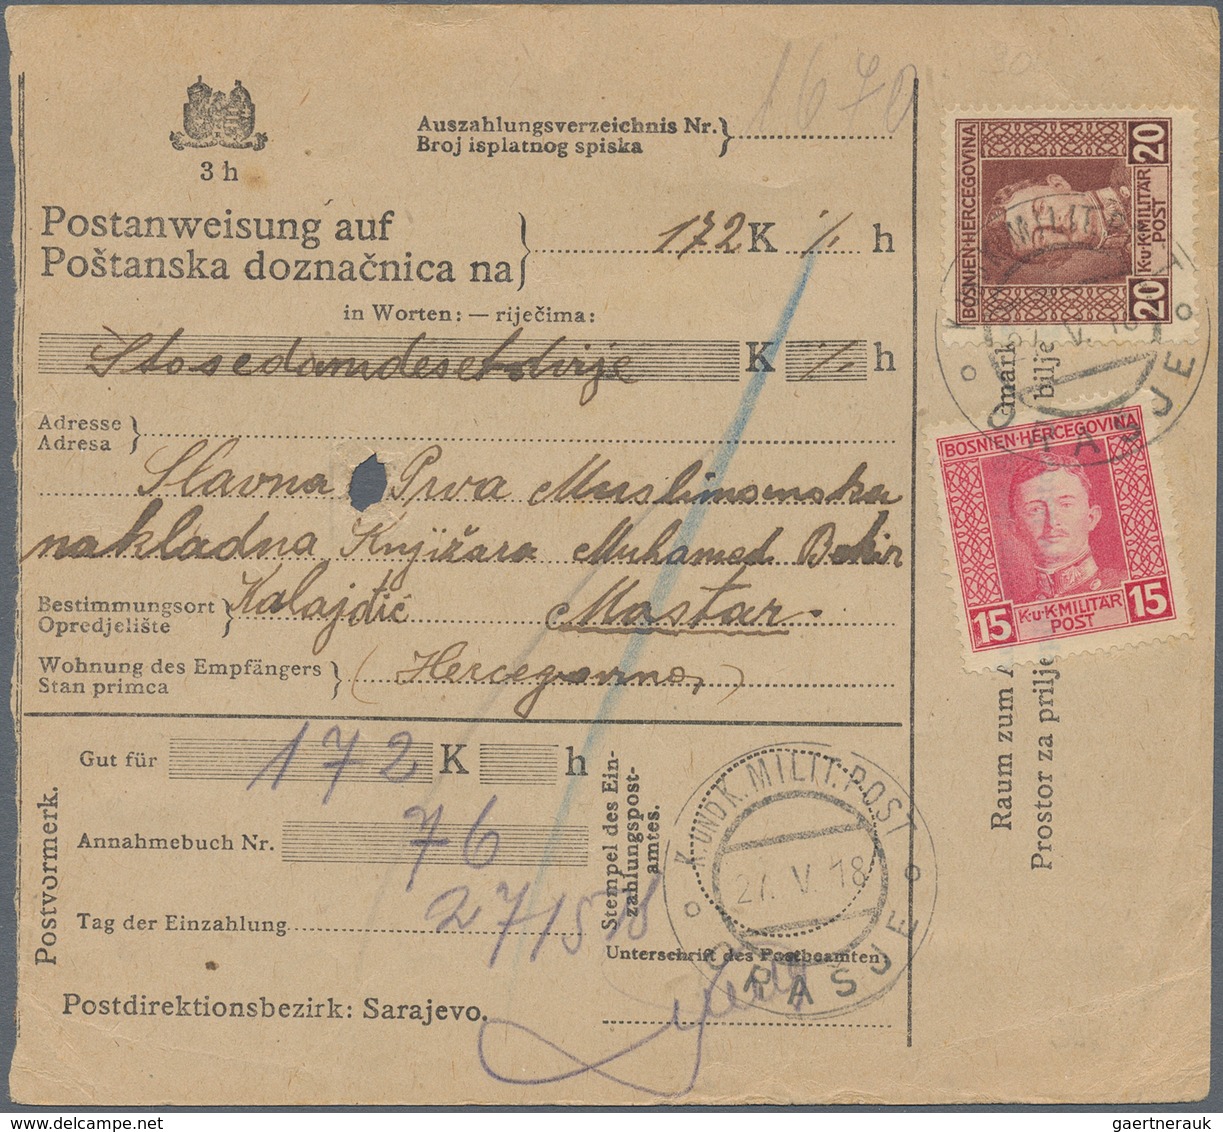 Bosnien und Herzegowina (Österreich 1879/1918): 1882/1918, holding of apprx. 230 cover, cards, ppc,